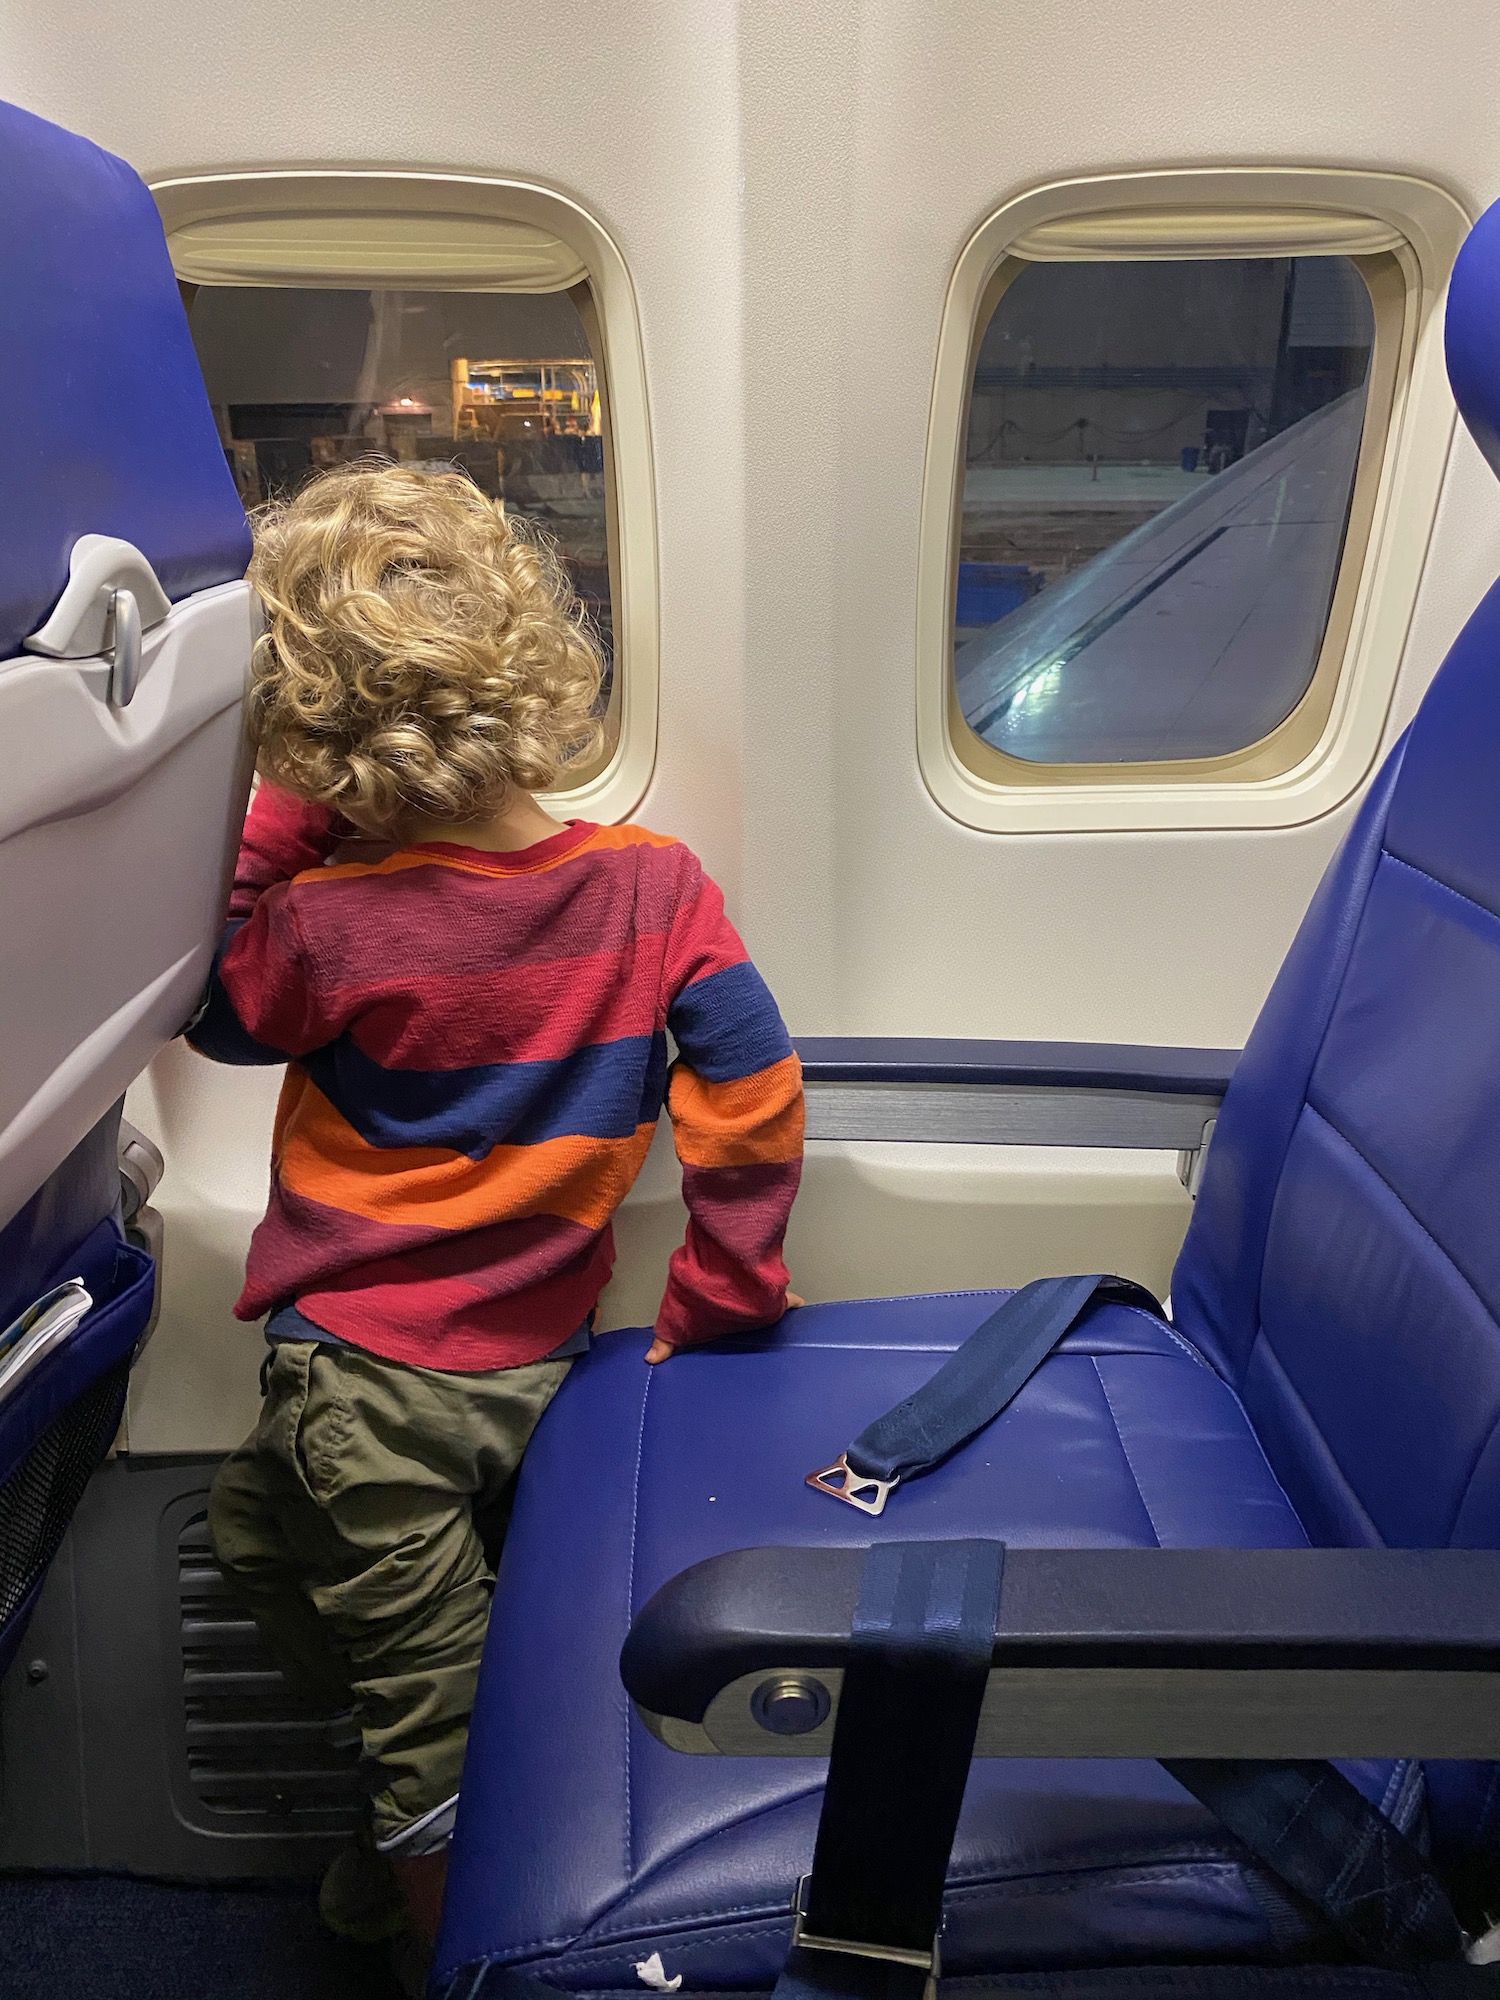 a child standing in a plane